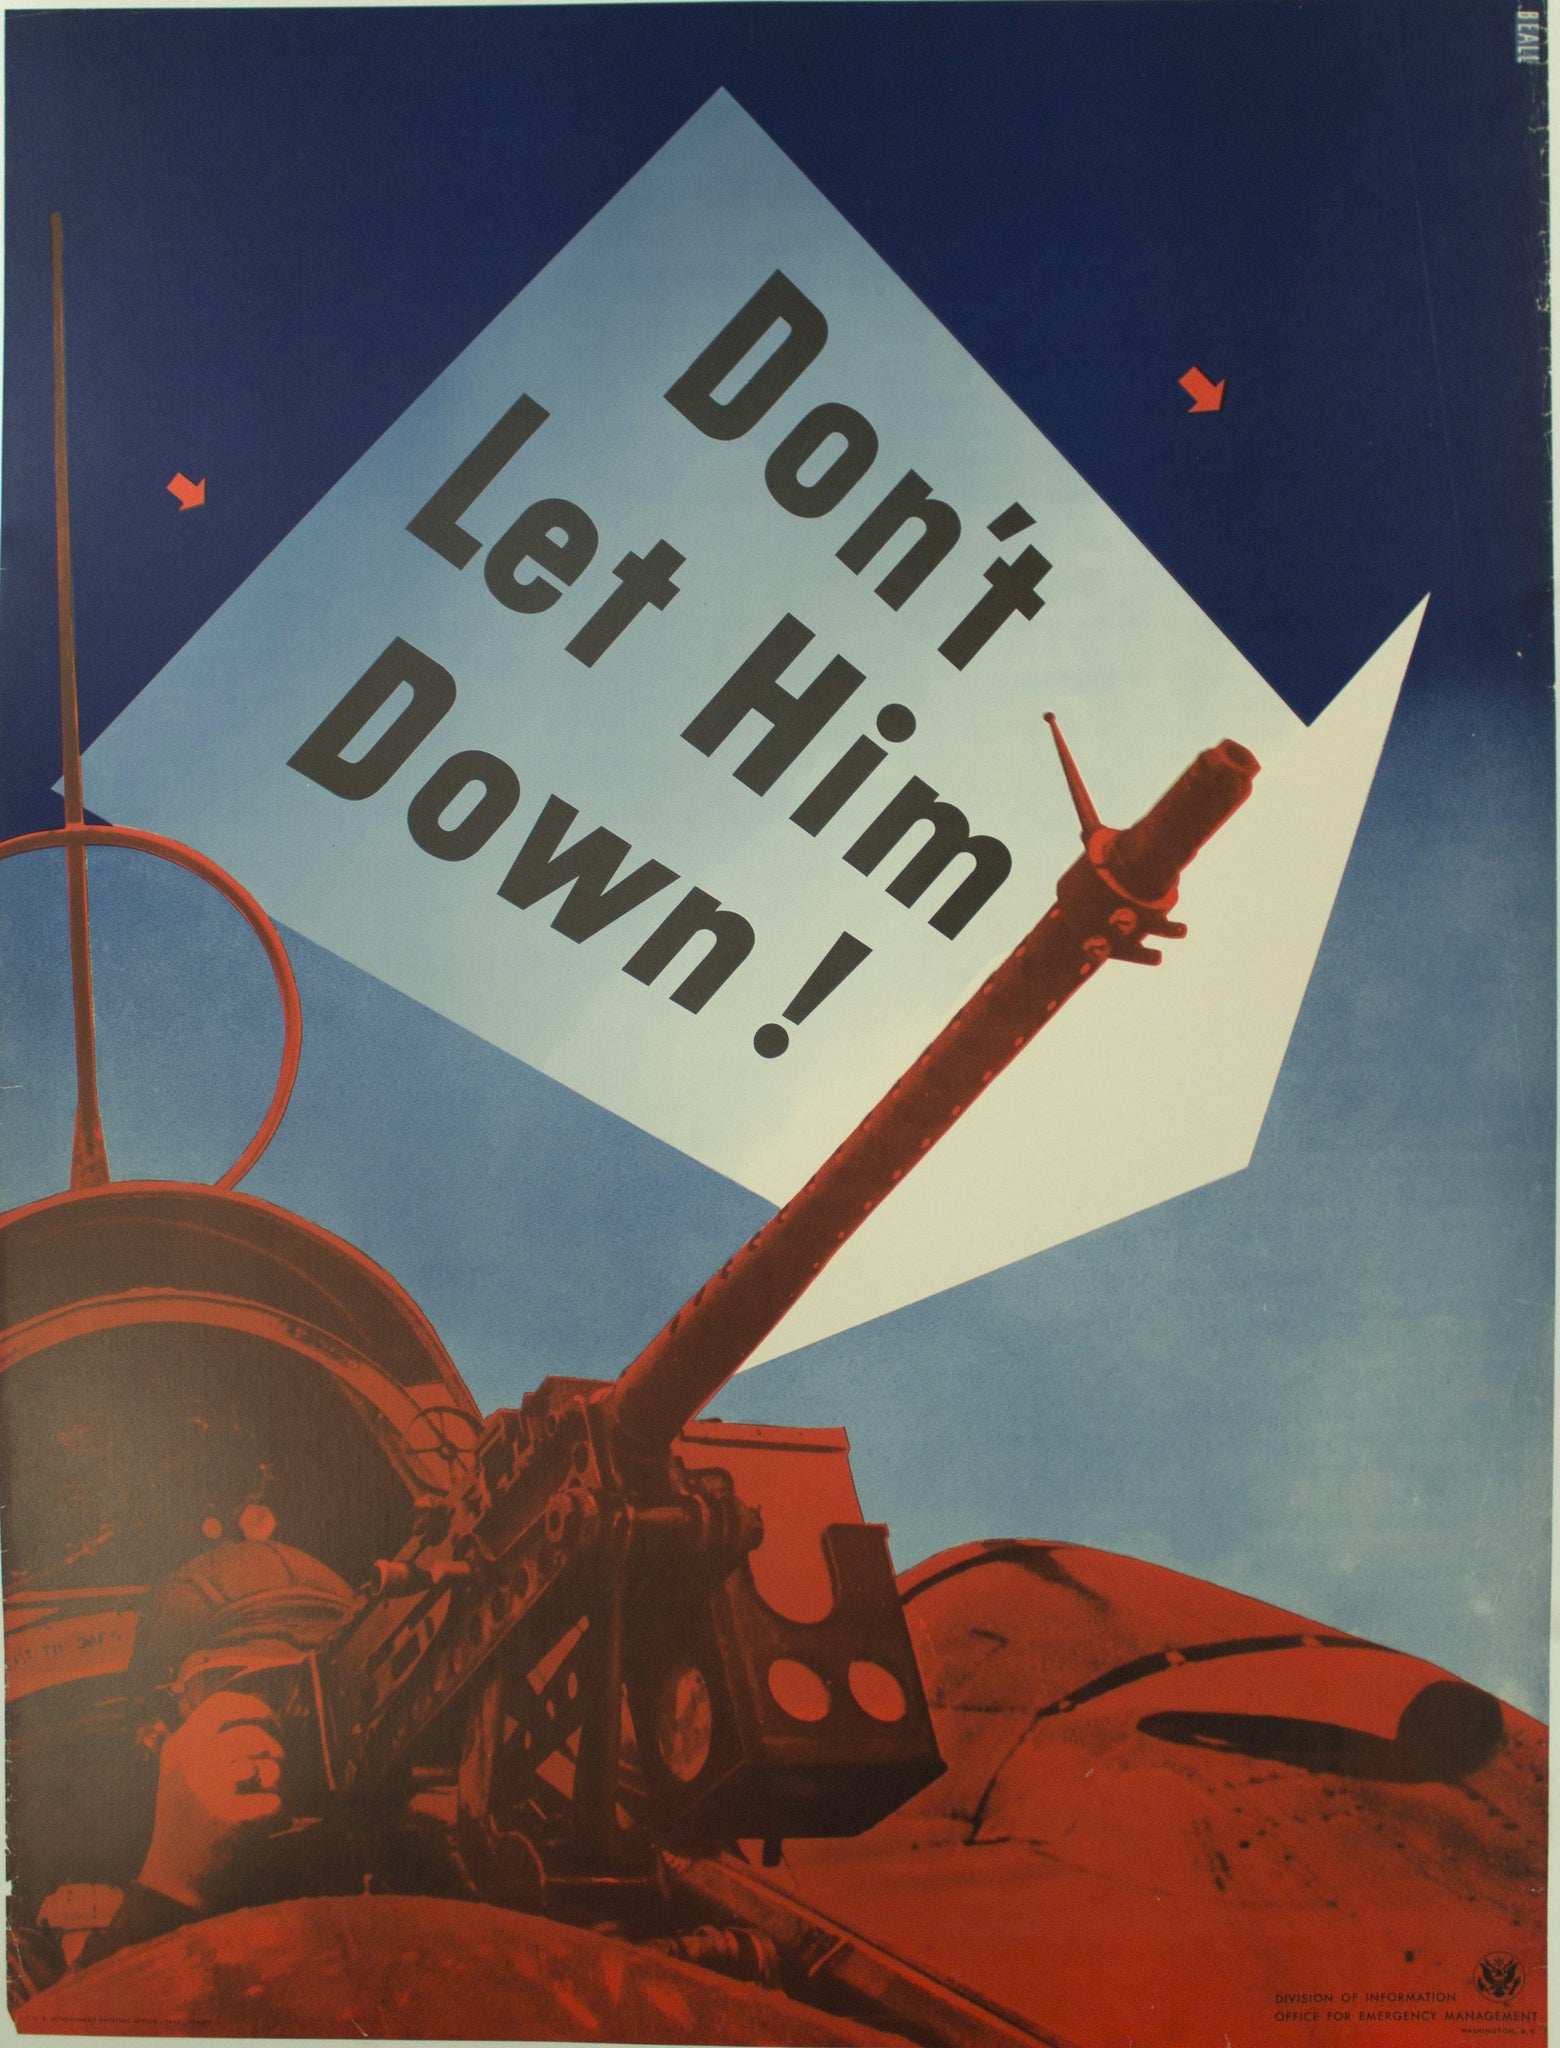 1942 Don't Let Him Down! Division of Information Office for Emergency Management Washington D. C. - Golden Age Posters